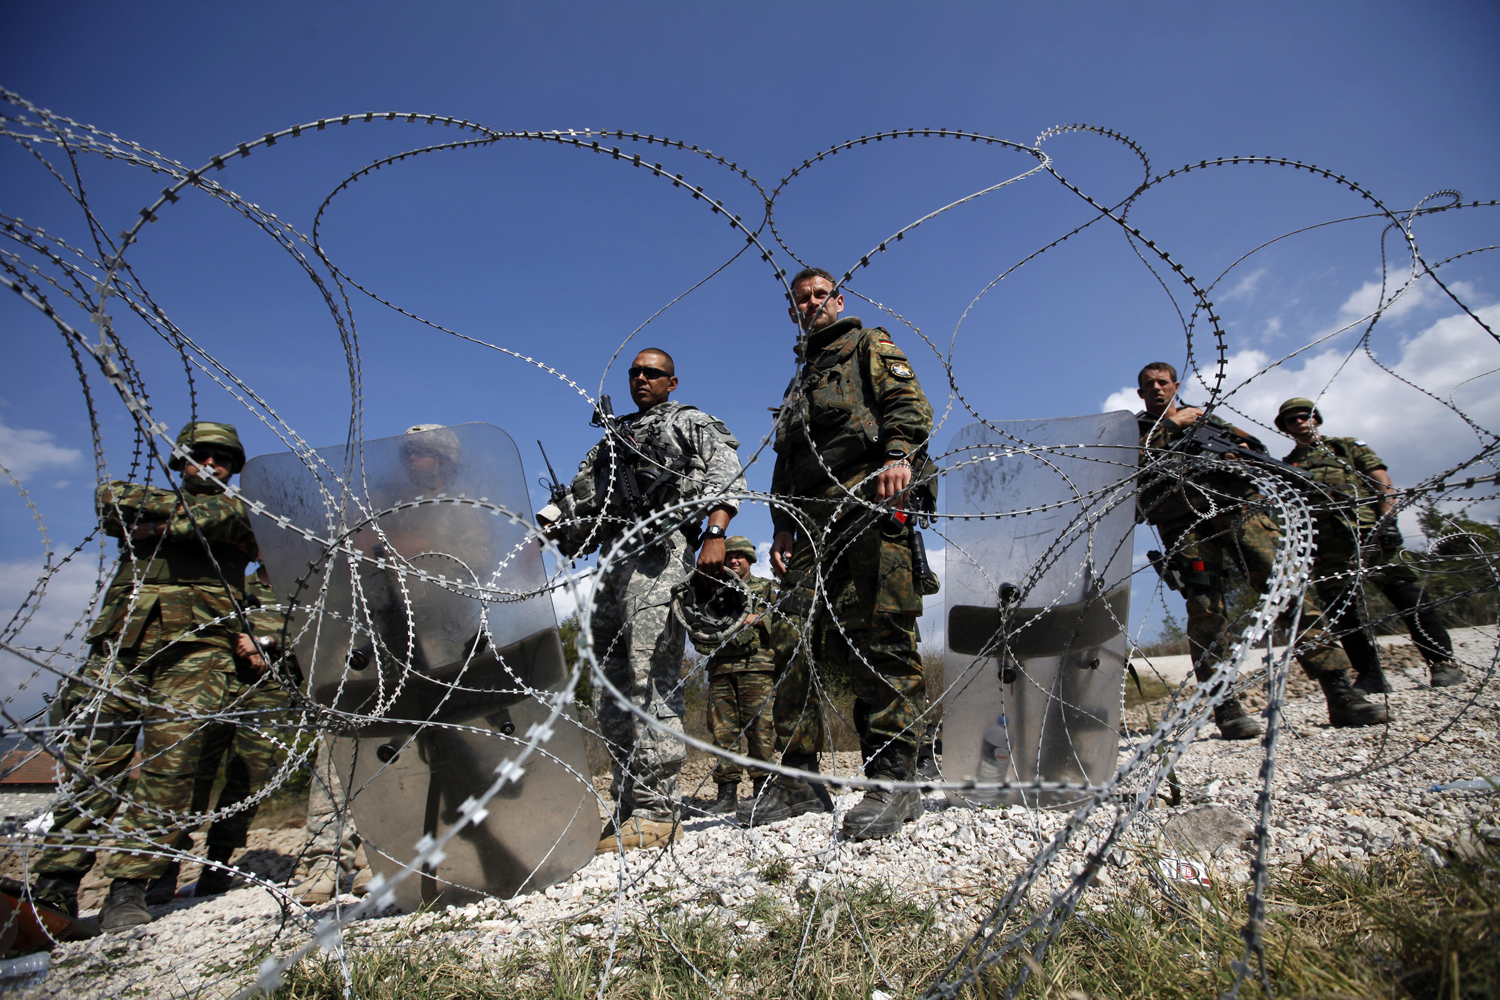 Kosovo Force soldiers from Greece, Germany and the U.S. stand guard at the closed Serbia-Kosovo border crossing of Jarinje on Sept. 29, 2011. (Marko Djurica— Reuters)